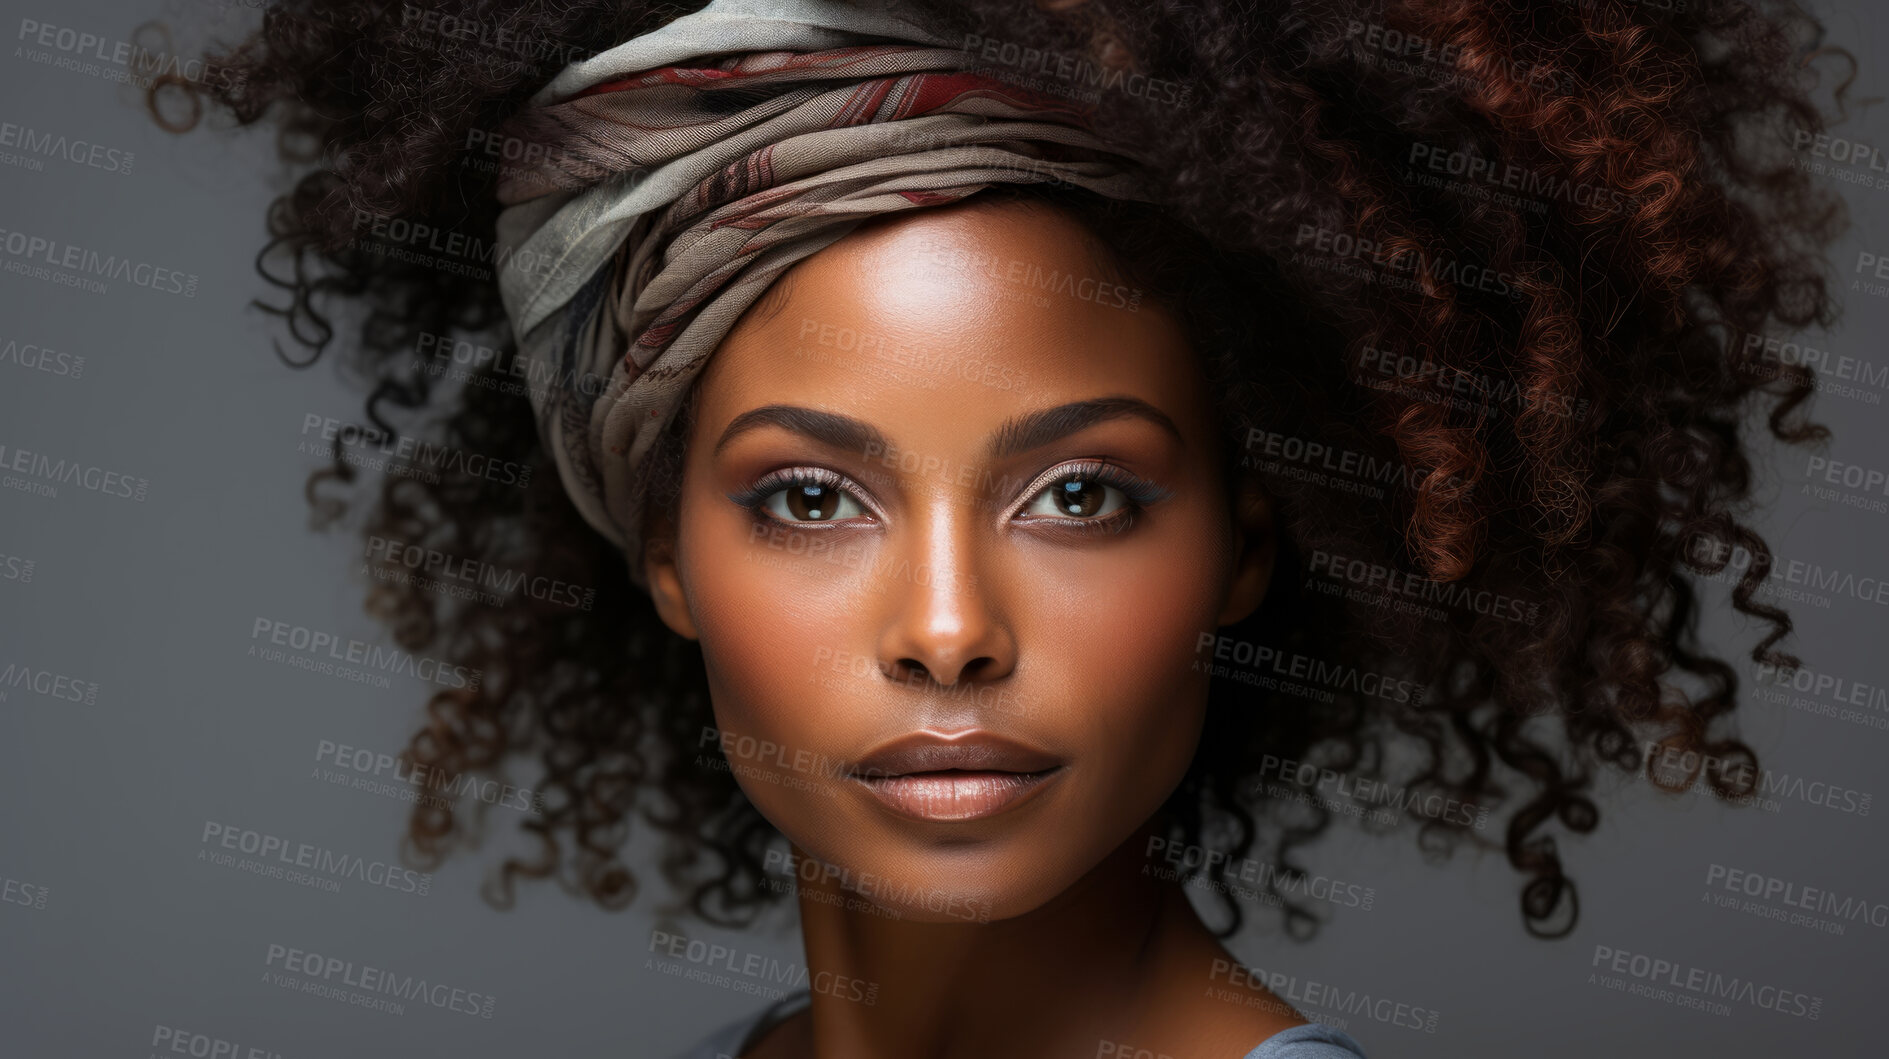 Buy stock photo Portrait of african model. Make-up, smooth skin, curly hair. Fashion, editorial concept.